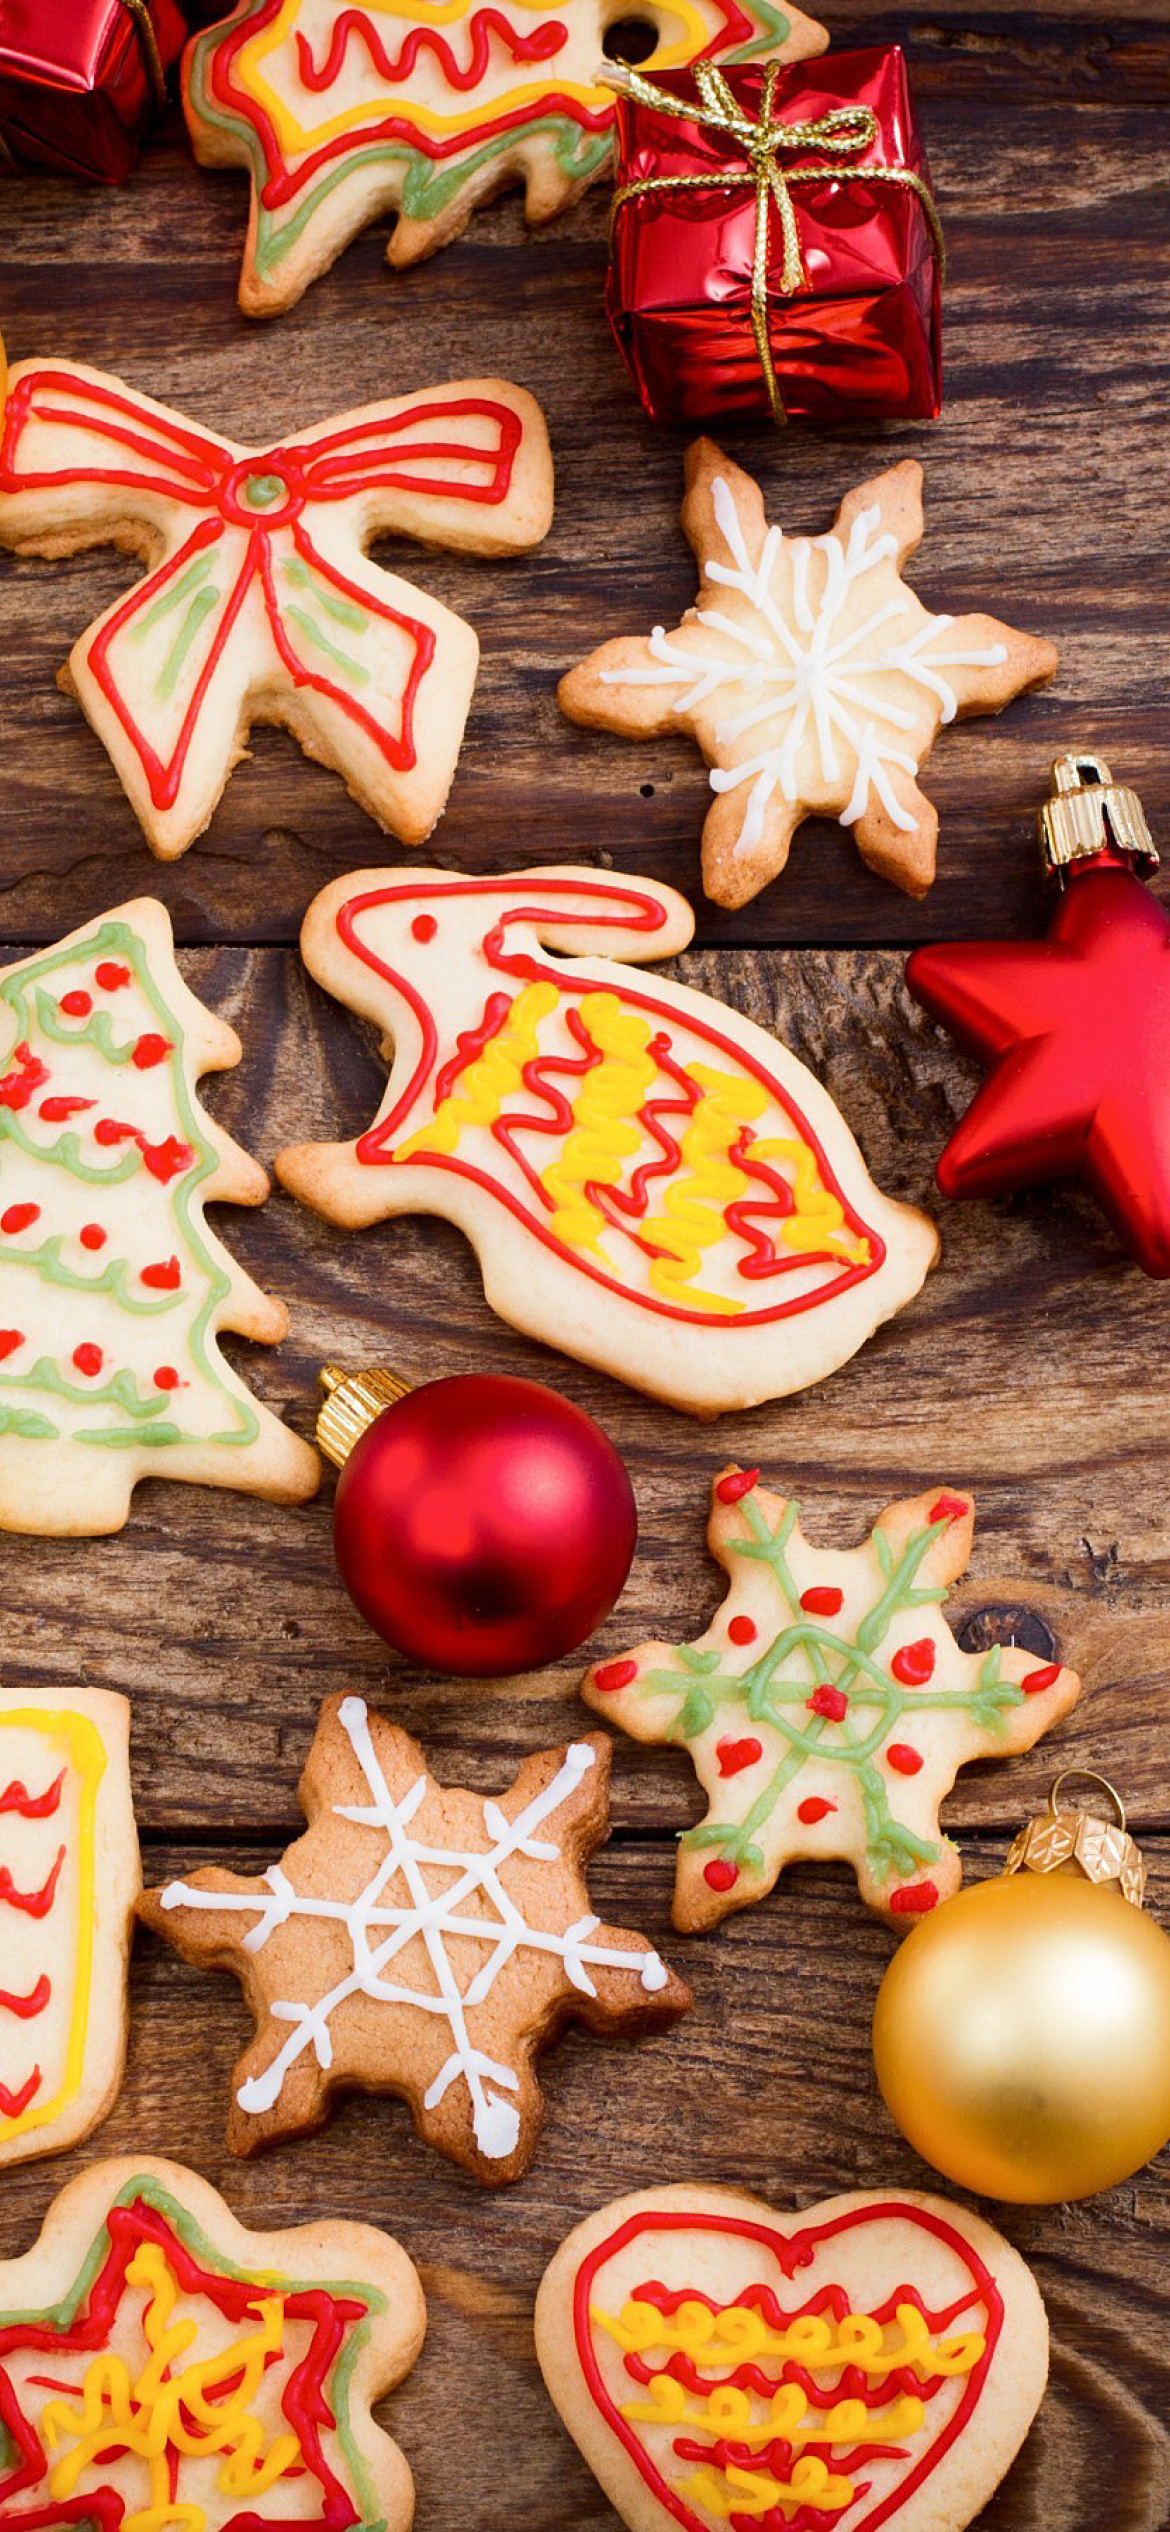 Das Christmas Decorations Cookies and Balls Wallpaper 1170x2532